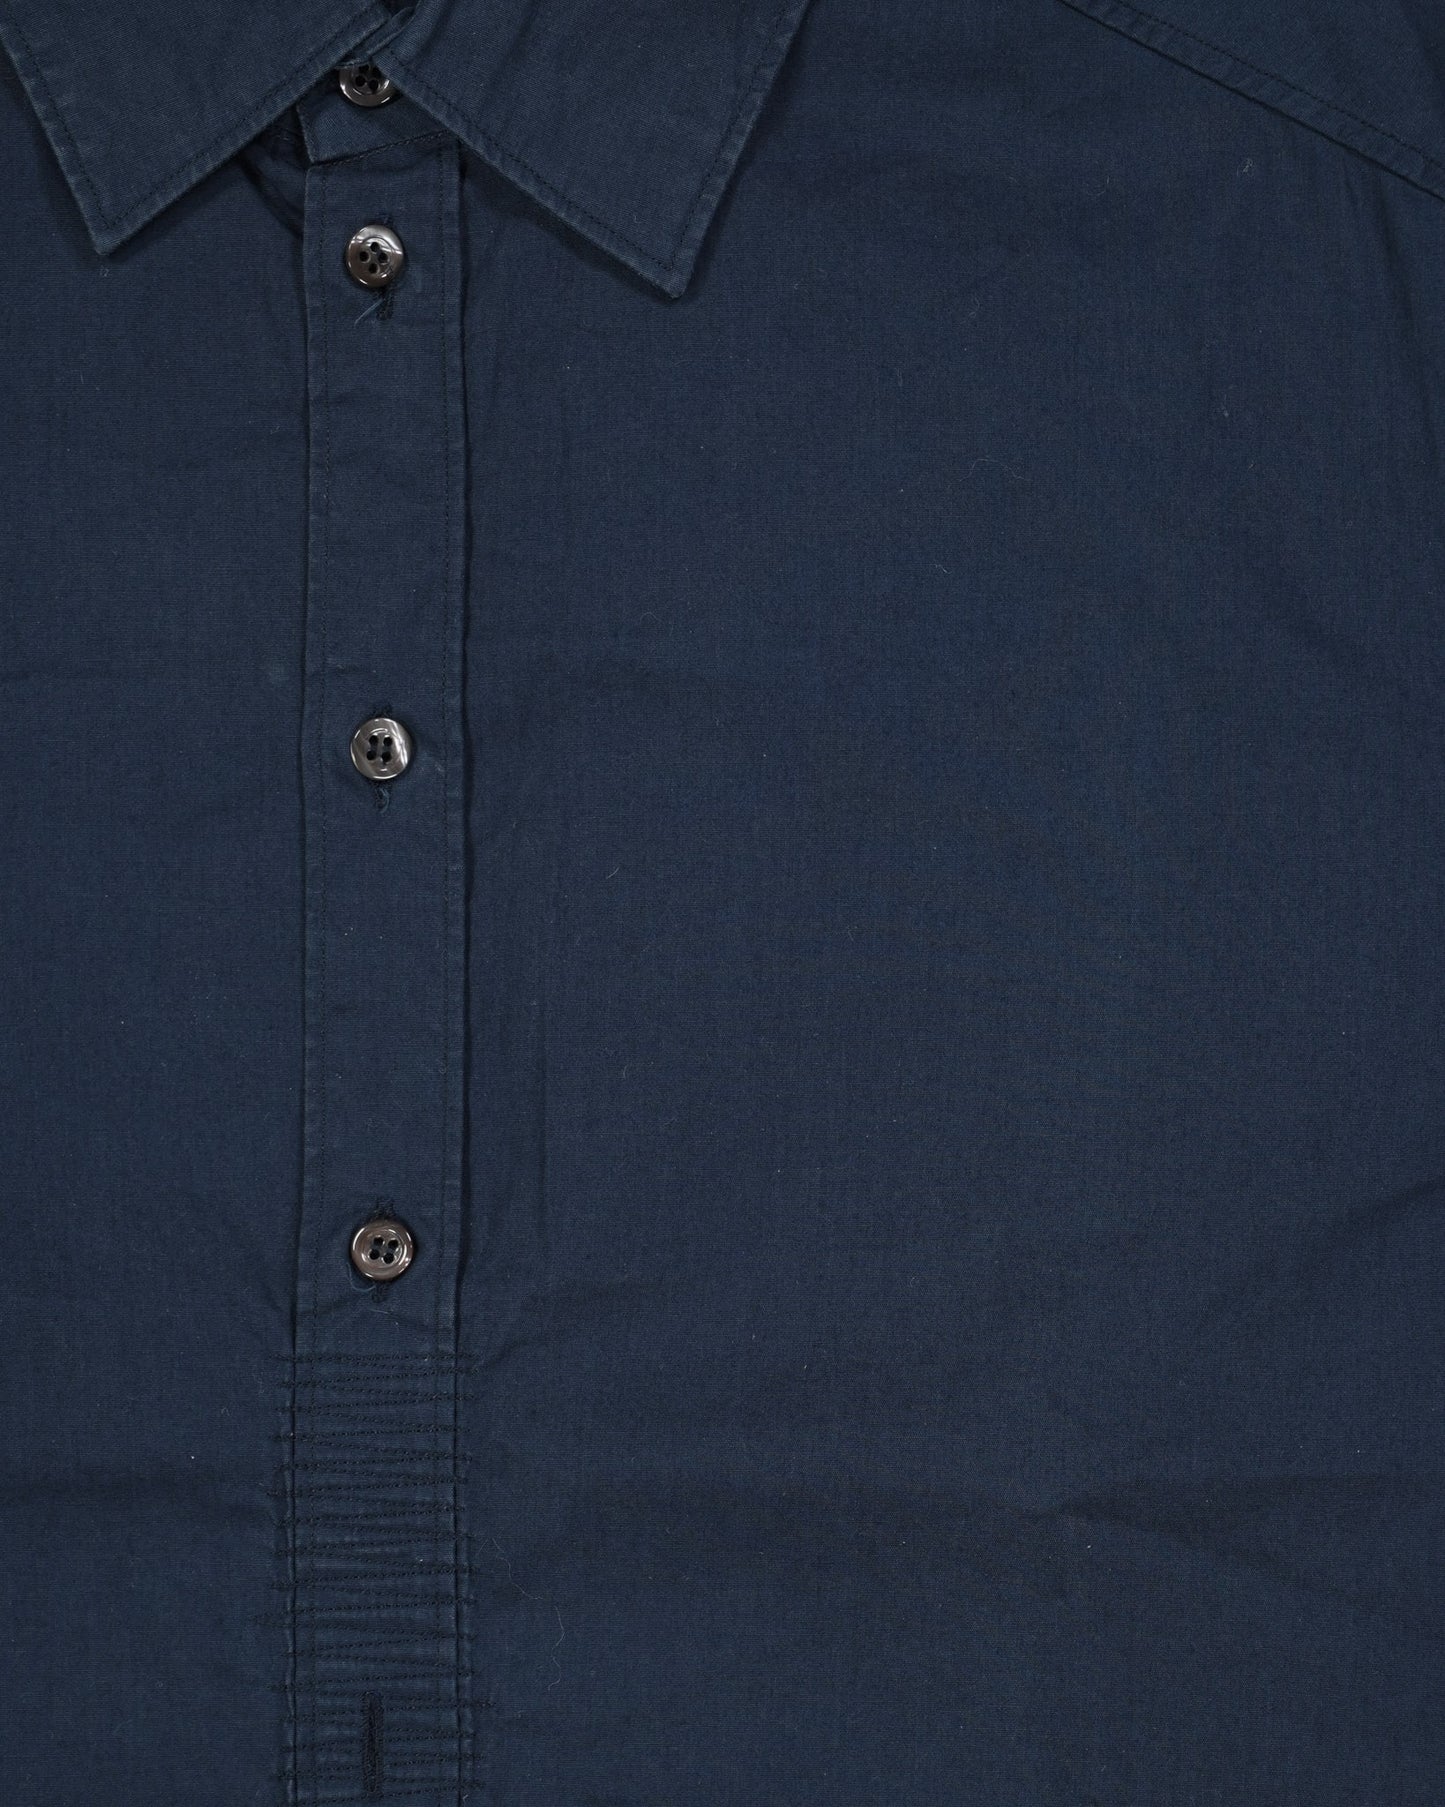 Carol Christian Poell Stitched Button Up Shirt - AW02 "Protection / Good Luck / Attraction" (CM/1720 SFINGE/16)